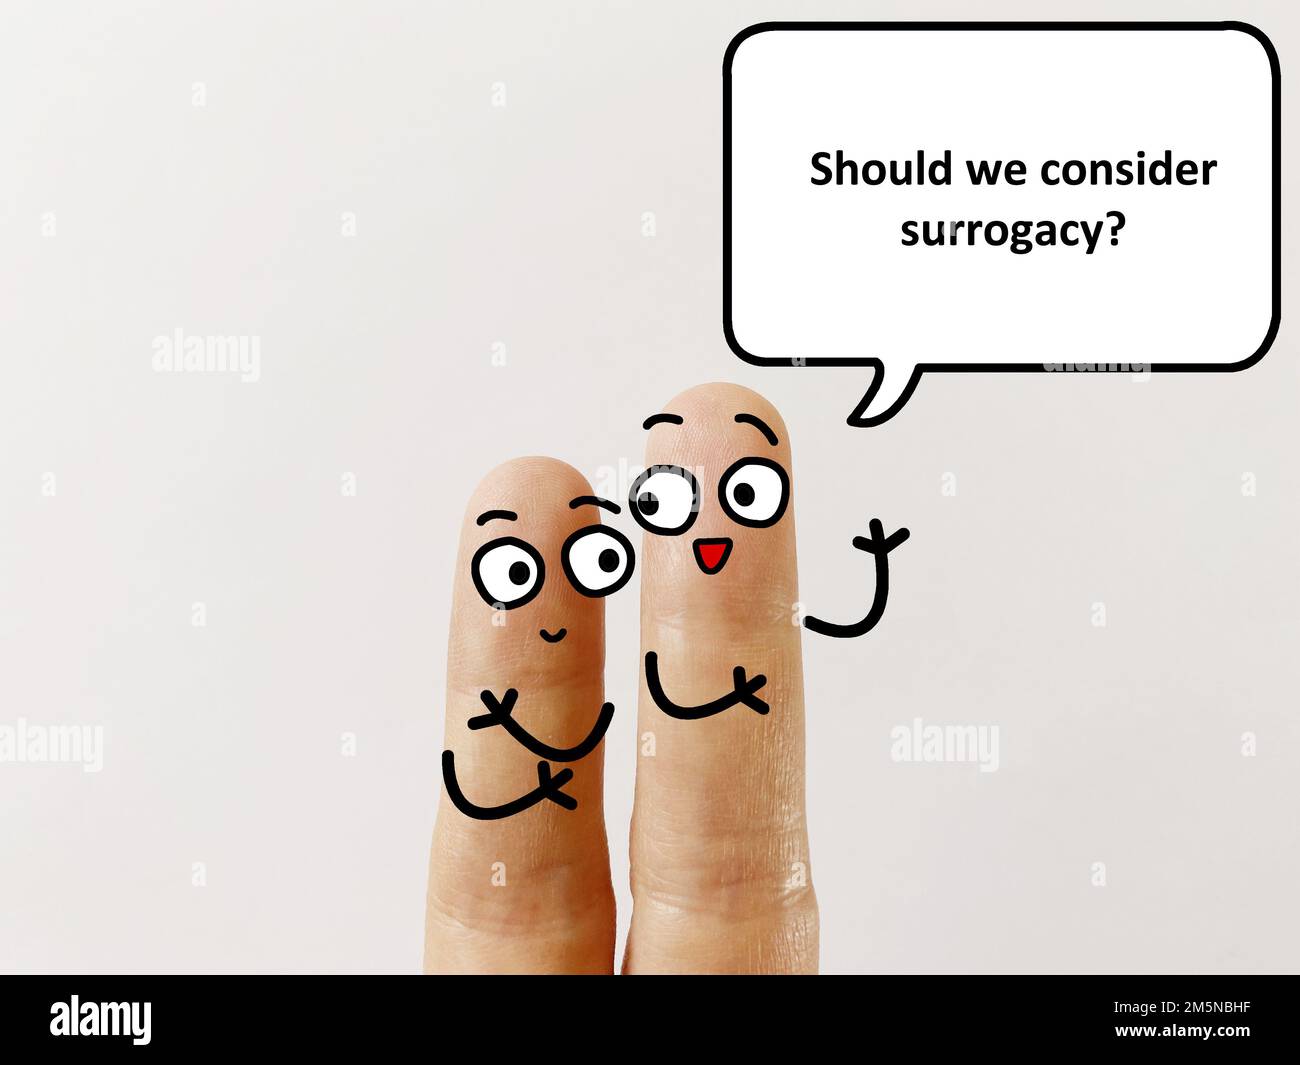 Two fingers are decorated as two person. One of them is asking another if they should consider surrogacy. Stock Photo